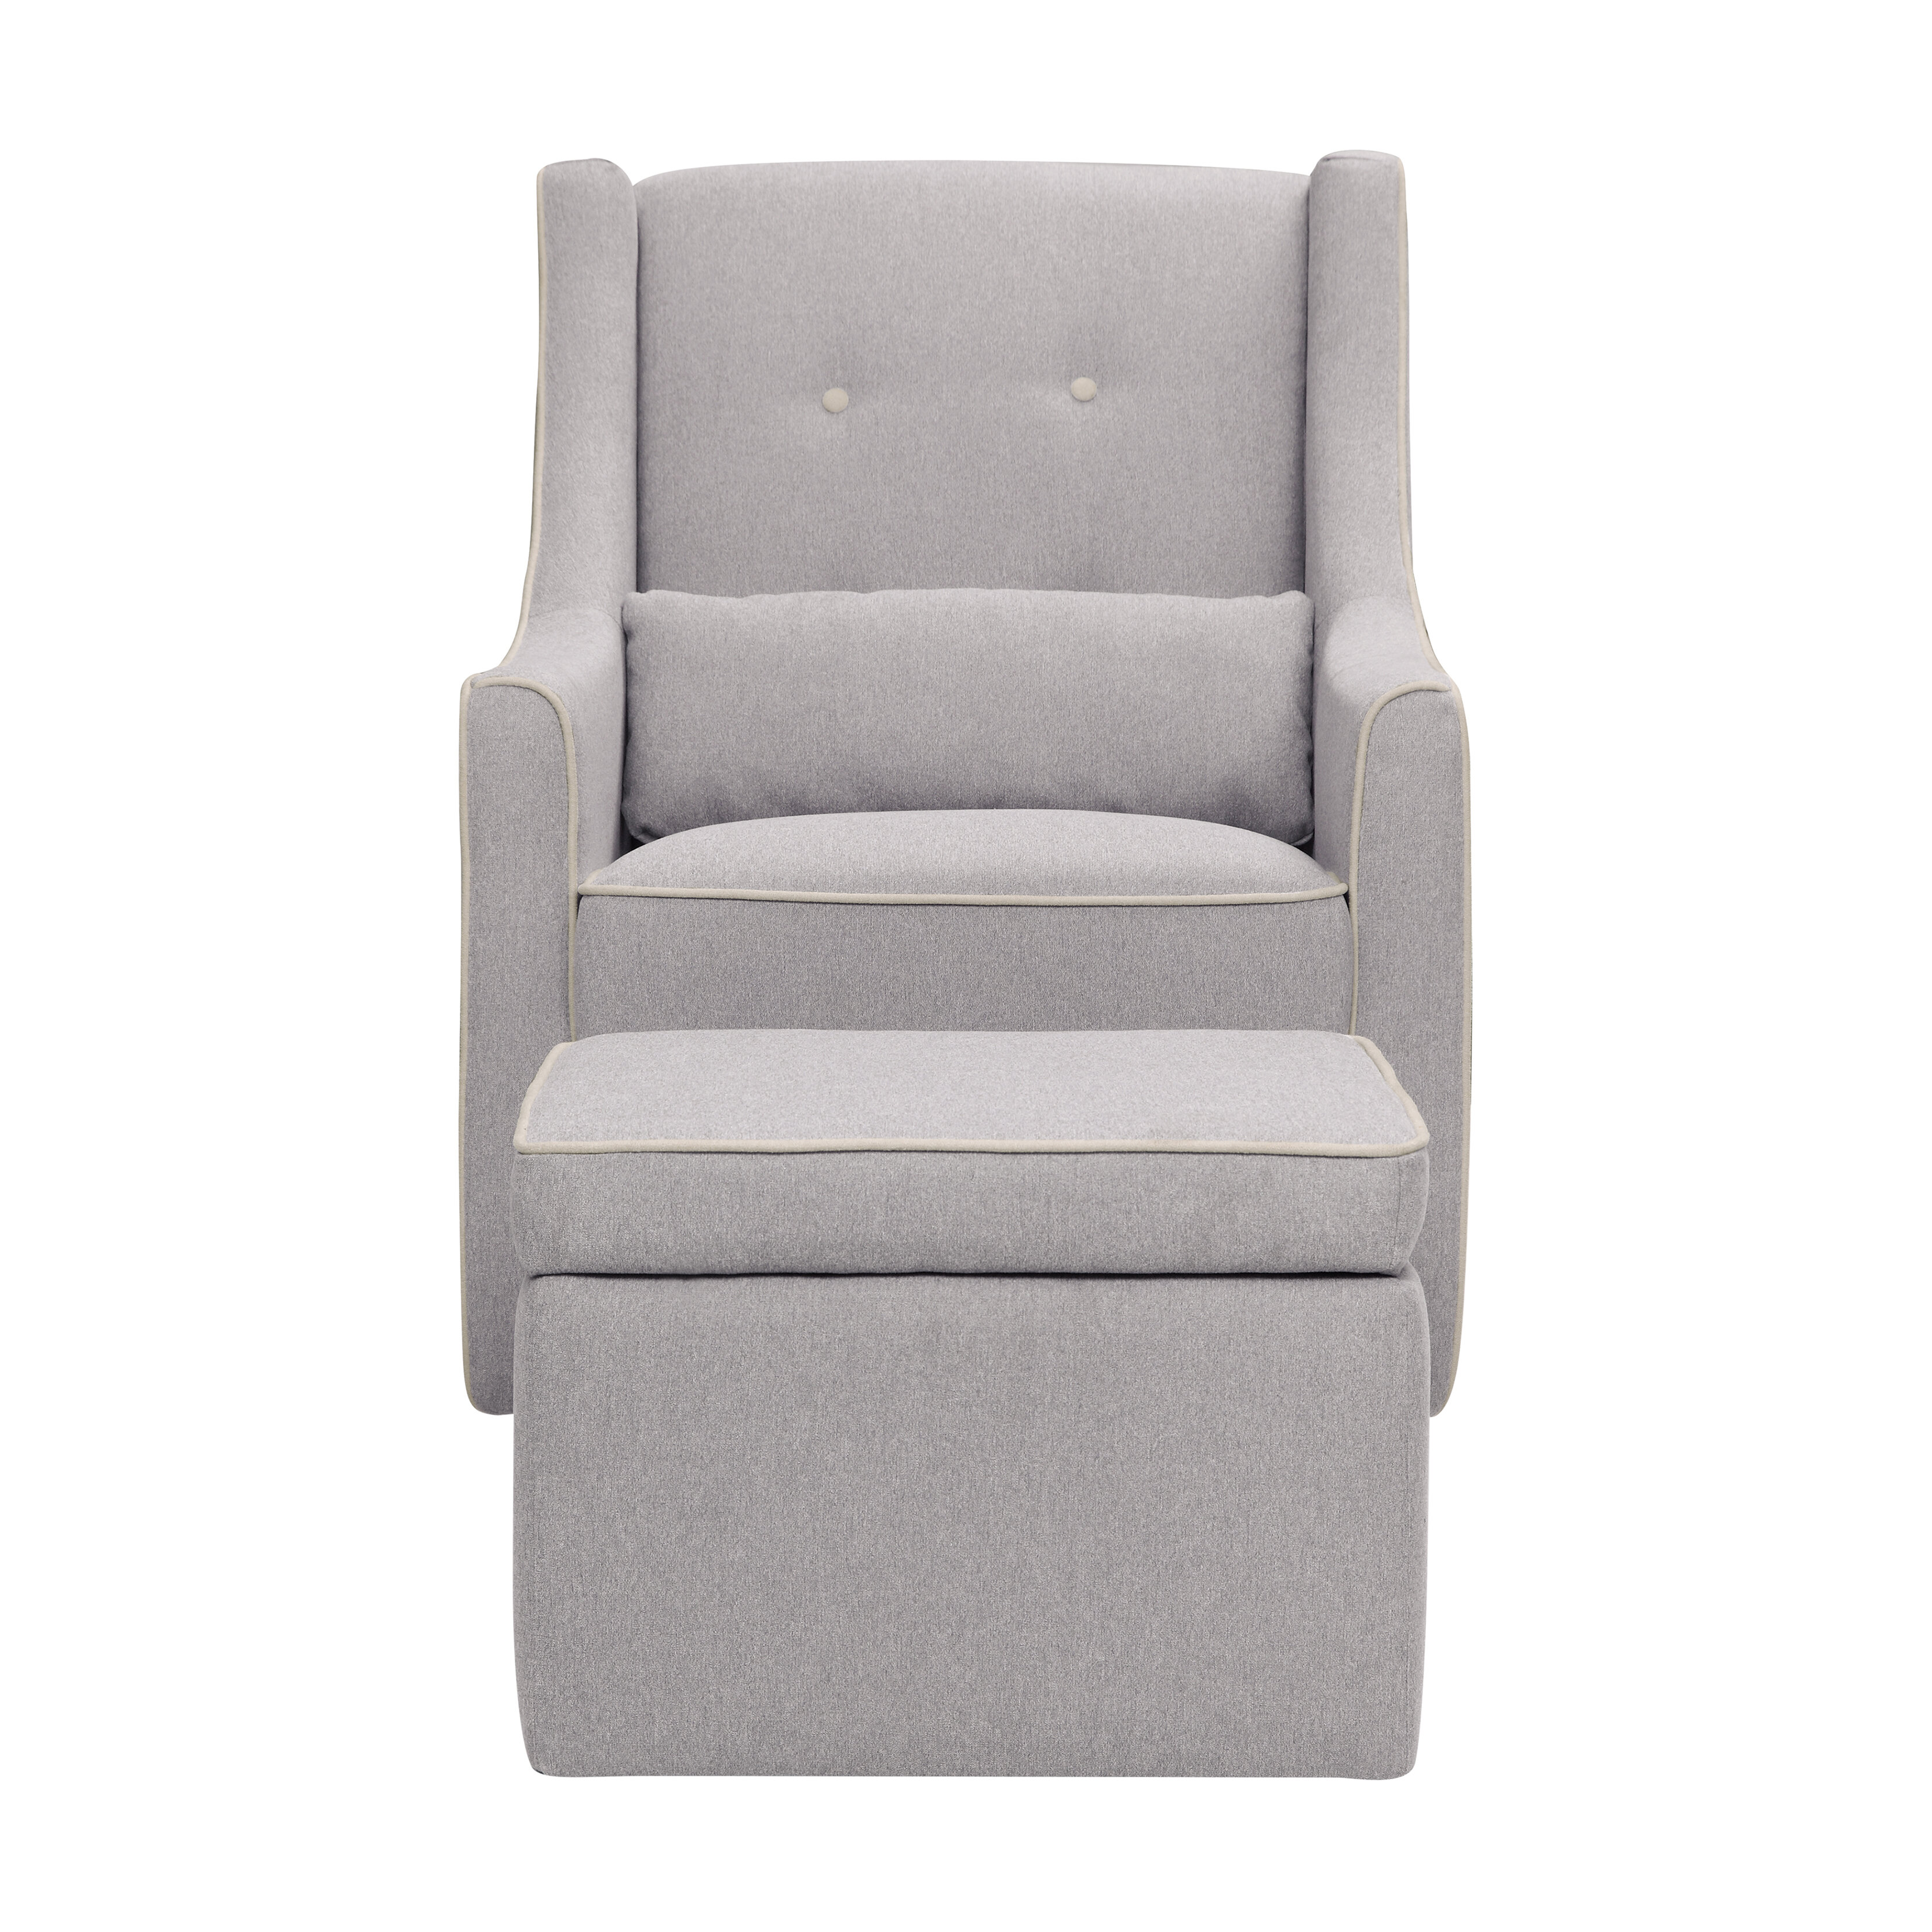 swivel glider chair and ottoman